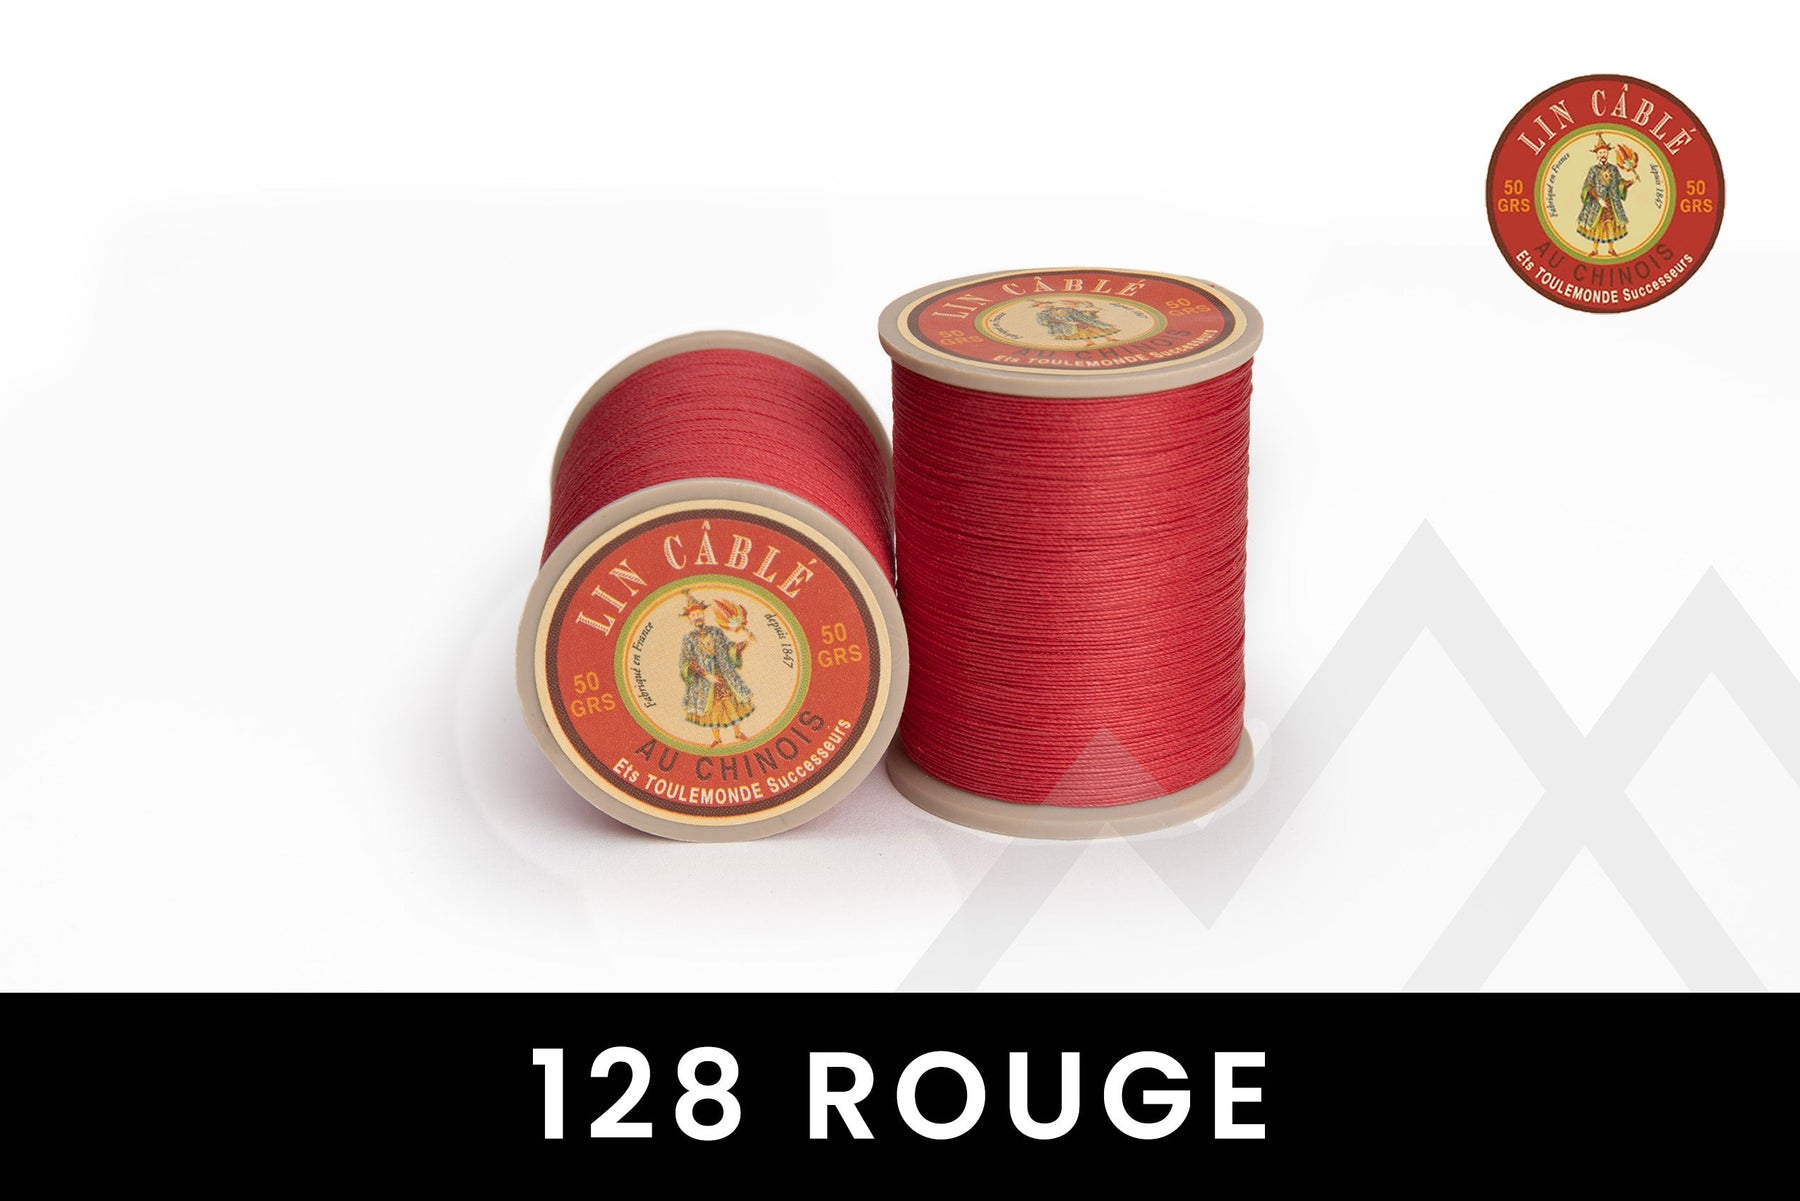 Fil au Chinois 🇫🇷 - "Lin Cable" Waxed Linen Thread (Size 832) *15 Meters